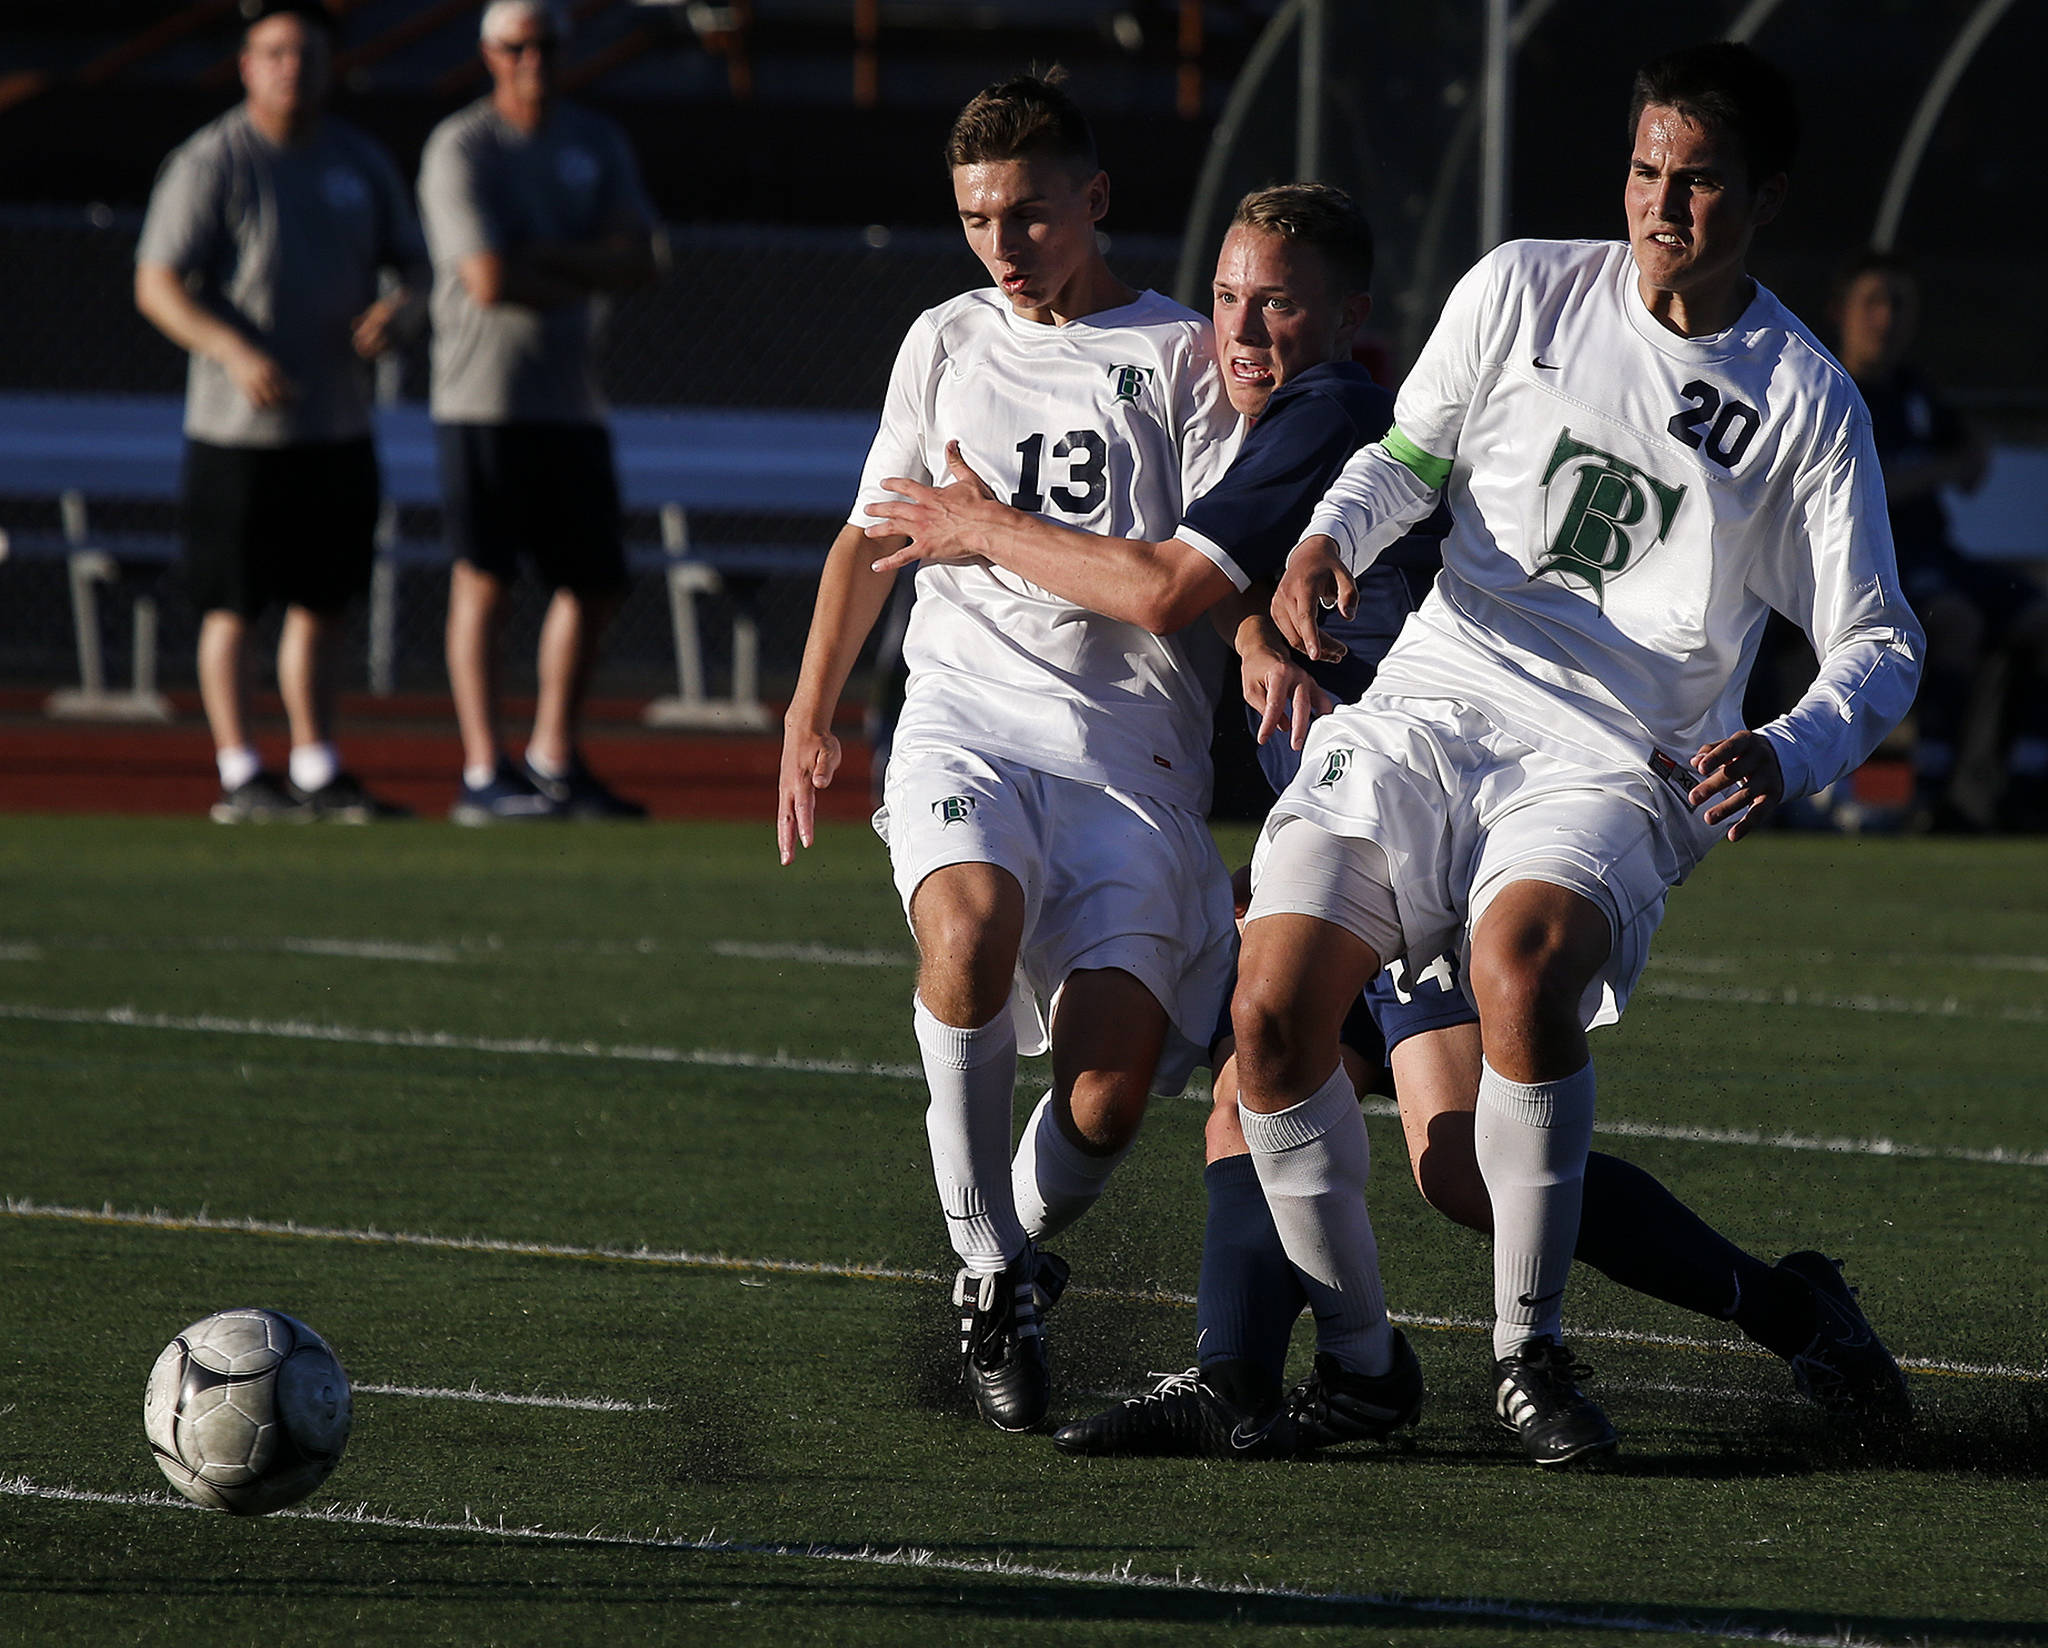 Glacier Peak’s Miles Johnston is sandwiched between Todd Beamer’s Adam Shown (left) and Luke Gregg (right) during a state 4A semifinal game at Sparks Stadium in Puyallup on Friday, May 26. After the two teams battled to a 2-2 draw in regulation, Todd Beamer won after a penalty shootout. (Ian Terry / The Herald)